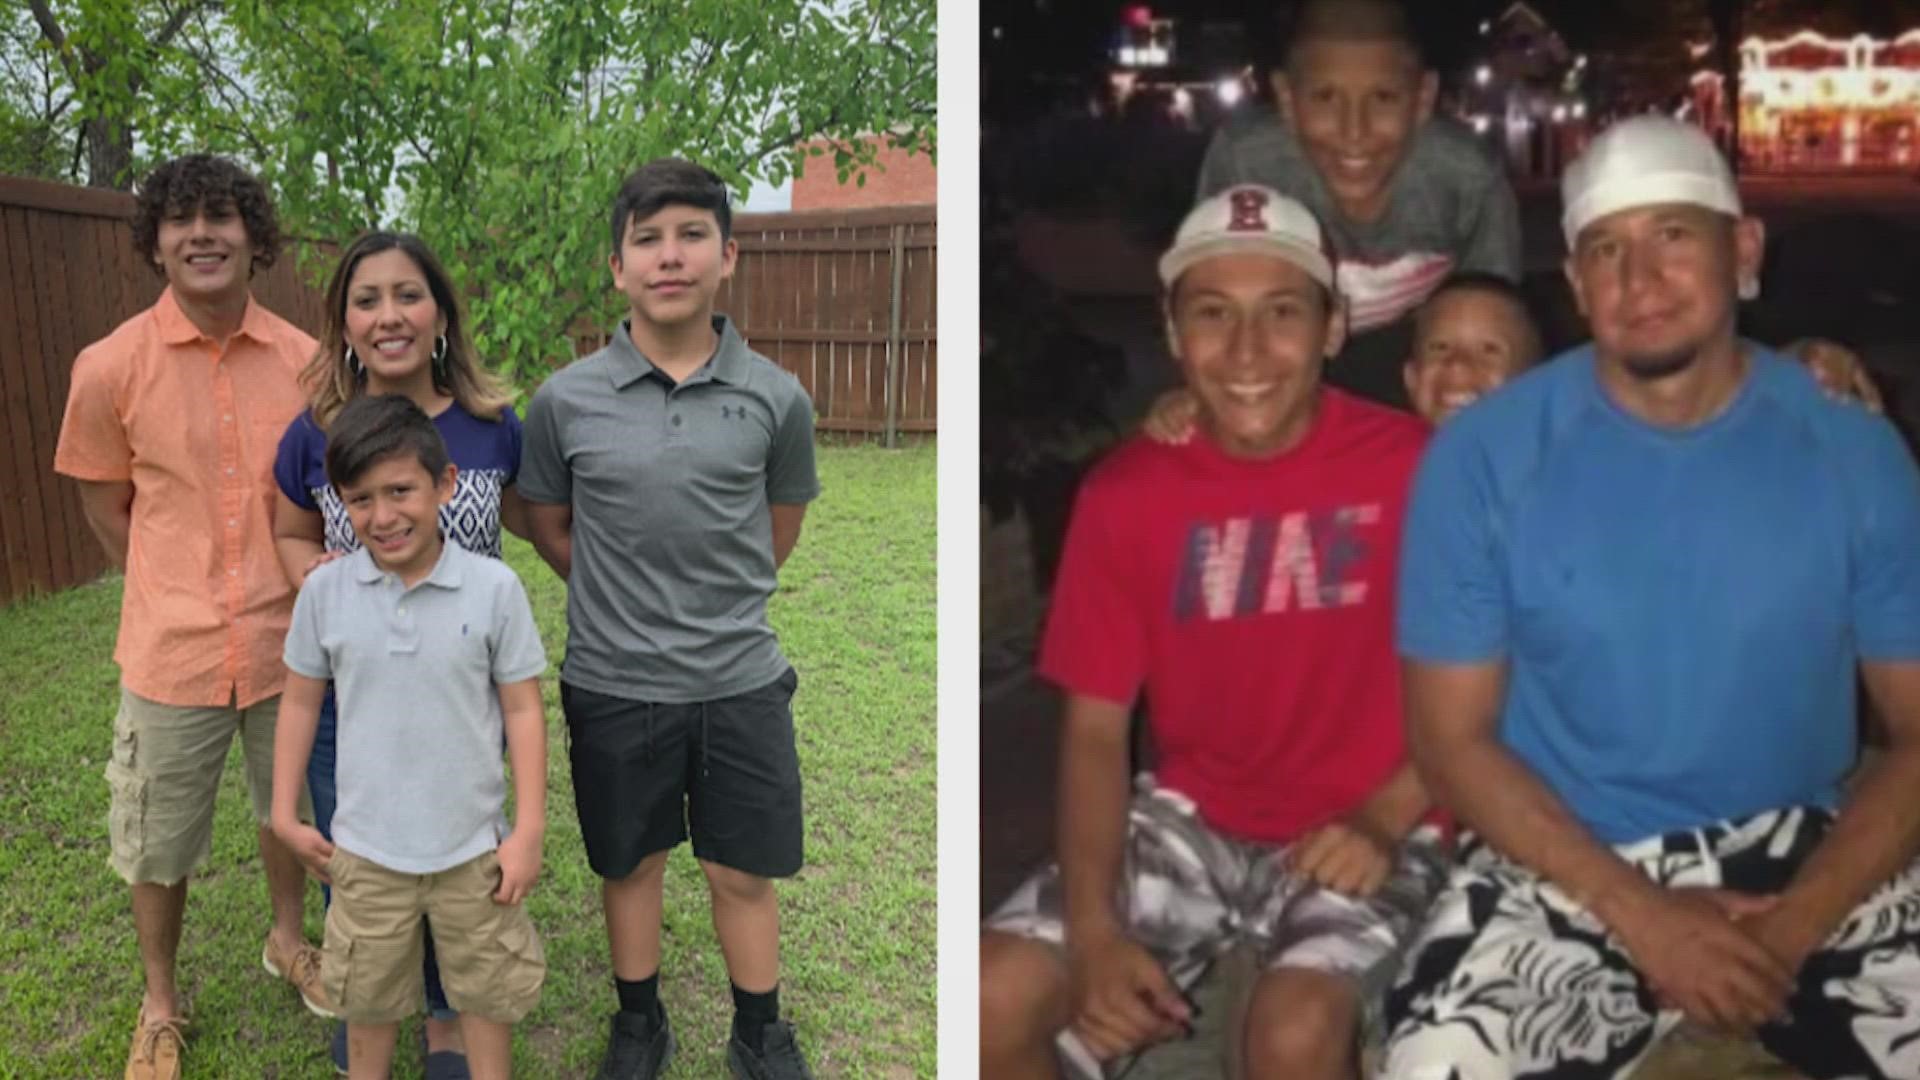 Isaiah Lopez, a senior at Boswell High School, and Elijah Lopez, a freshman, died in the crash near the intersection of Bailey Boswell Rd. and Twin  Mills Blvd.